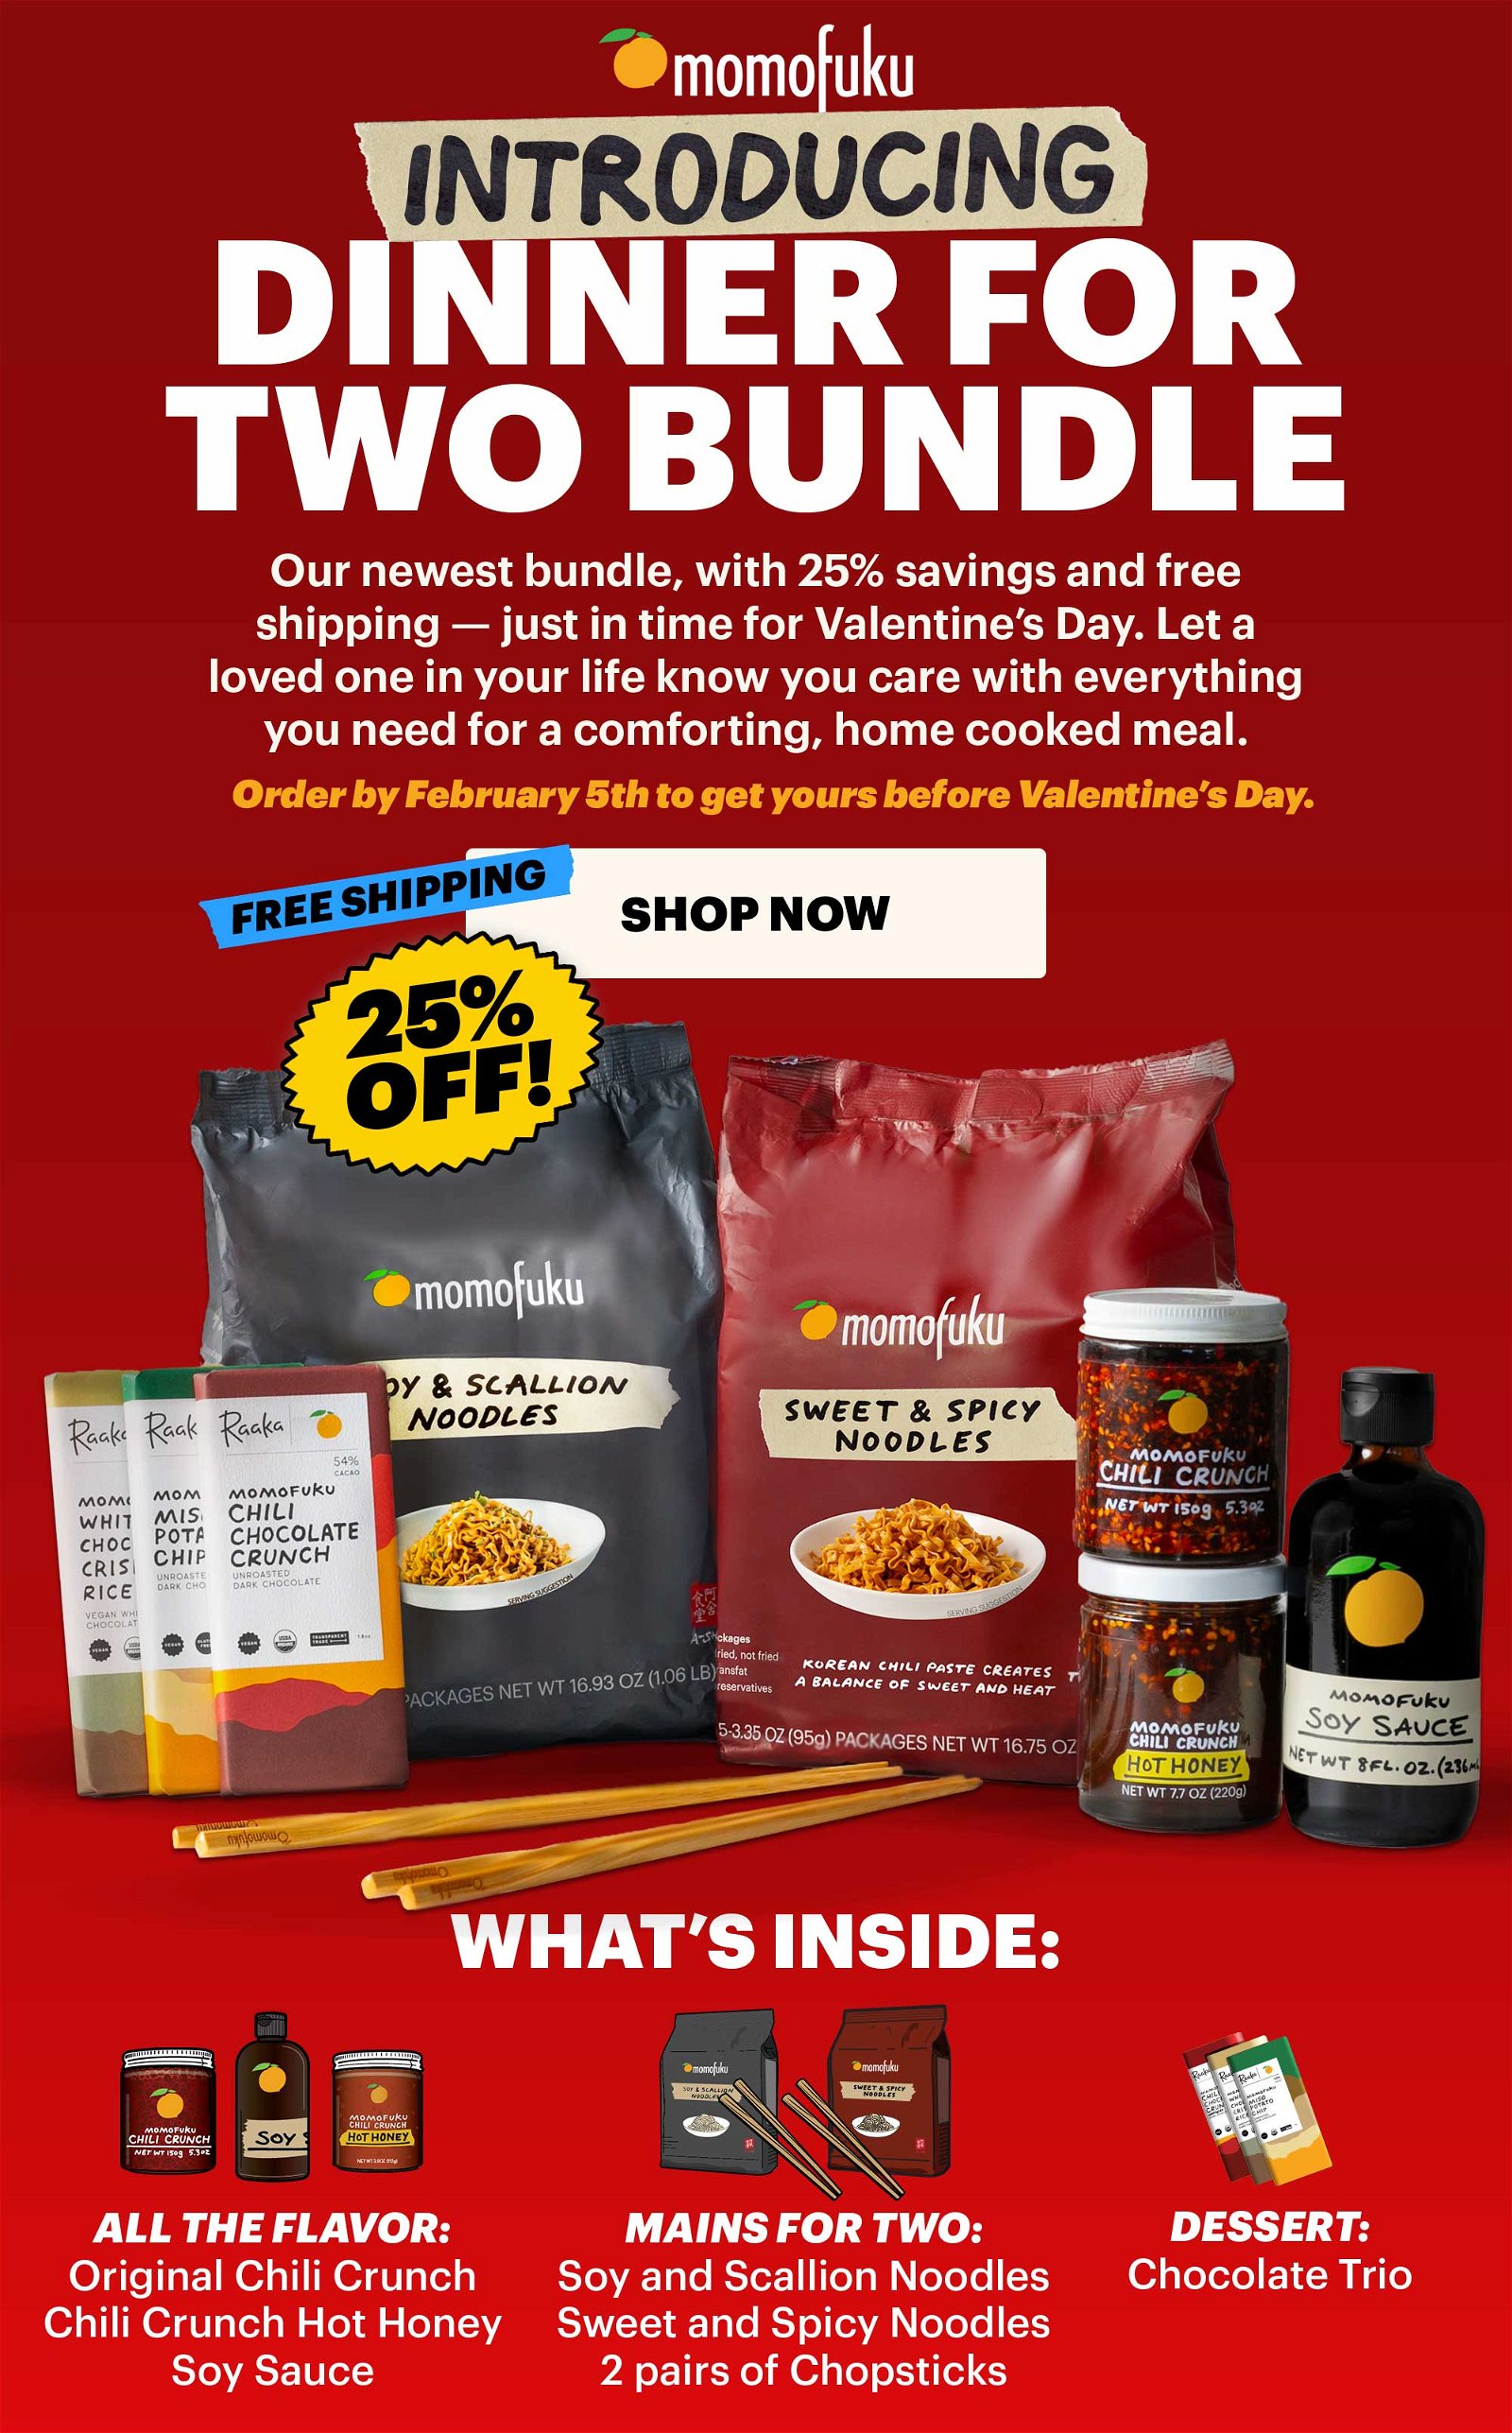 INTRODUCING DINNER FOR TWO BUNDLE. Our newest bundle, with 25% savings and free shipping -- just in time for Valentine's Day. Let a loved one in your life know you care with everything you need for a comforting, home cooked meal. Order by February 5th to get yours before Valentine's Day. FREE SHIPPING. 25% OFF. SHOP NOW. WHAT'S INSIDE: ALL THE FLAVOR: Original Chili Crunch, Chili Crunch Hot Honey, Soy Sauce. MAINS FOR TWO: Soy and Scallion Noodles, Sweet & Spicy Noodles, 2 pairs of Chopsticks. DESSERT: Chocolate Trio